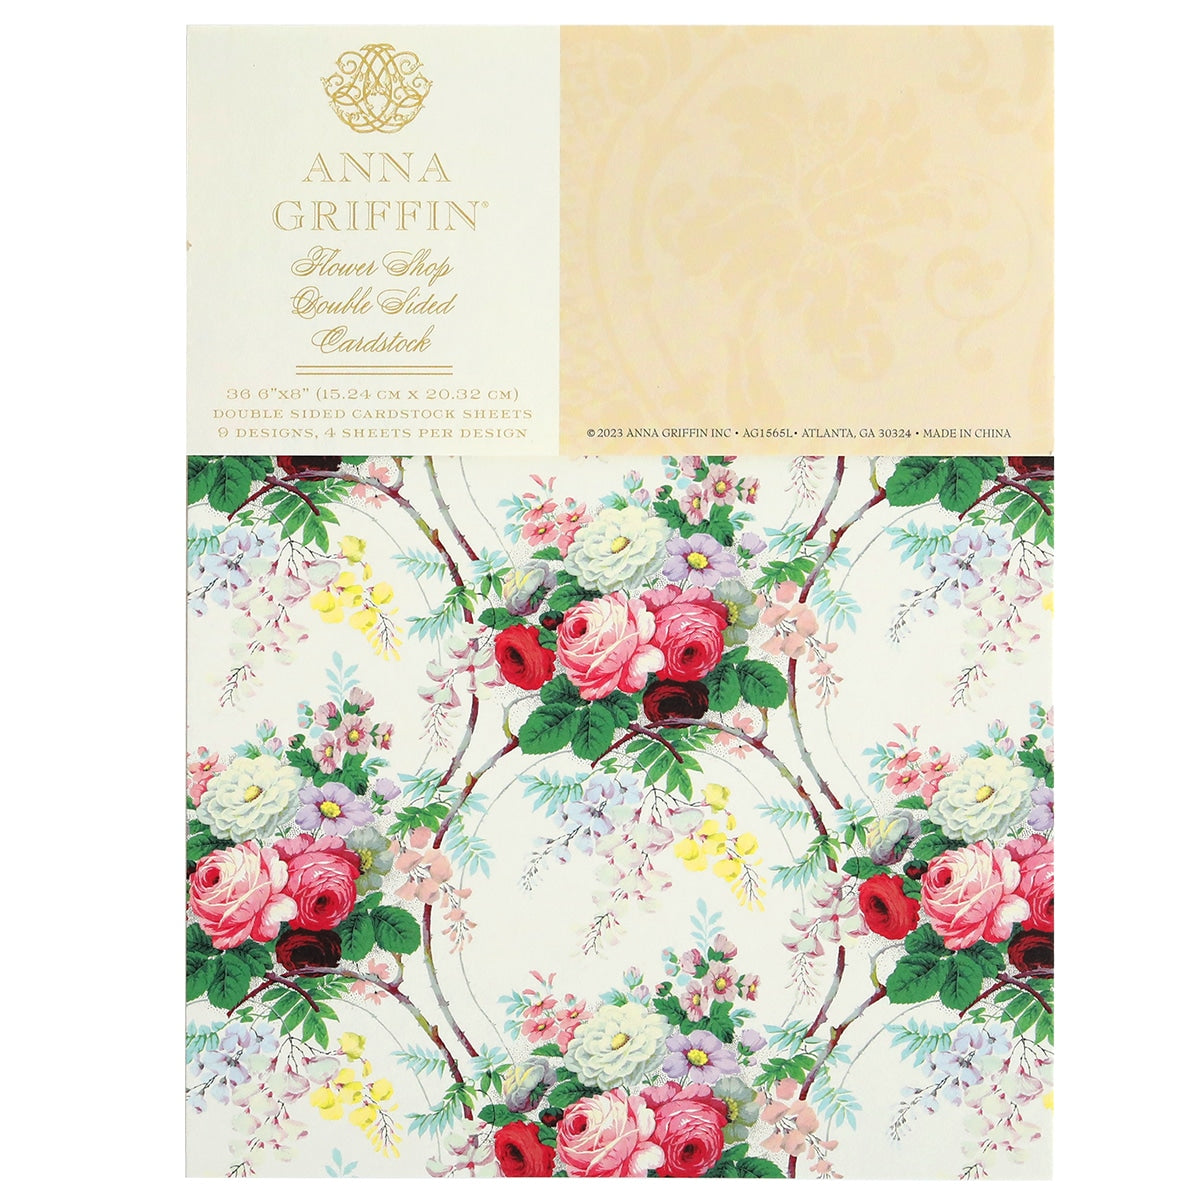 An image of Flower Shop Double Sided Cardstock.